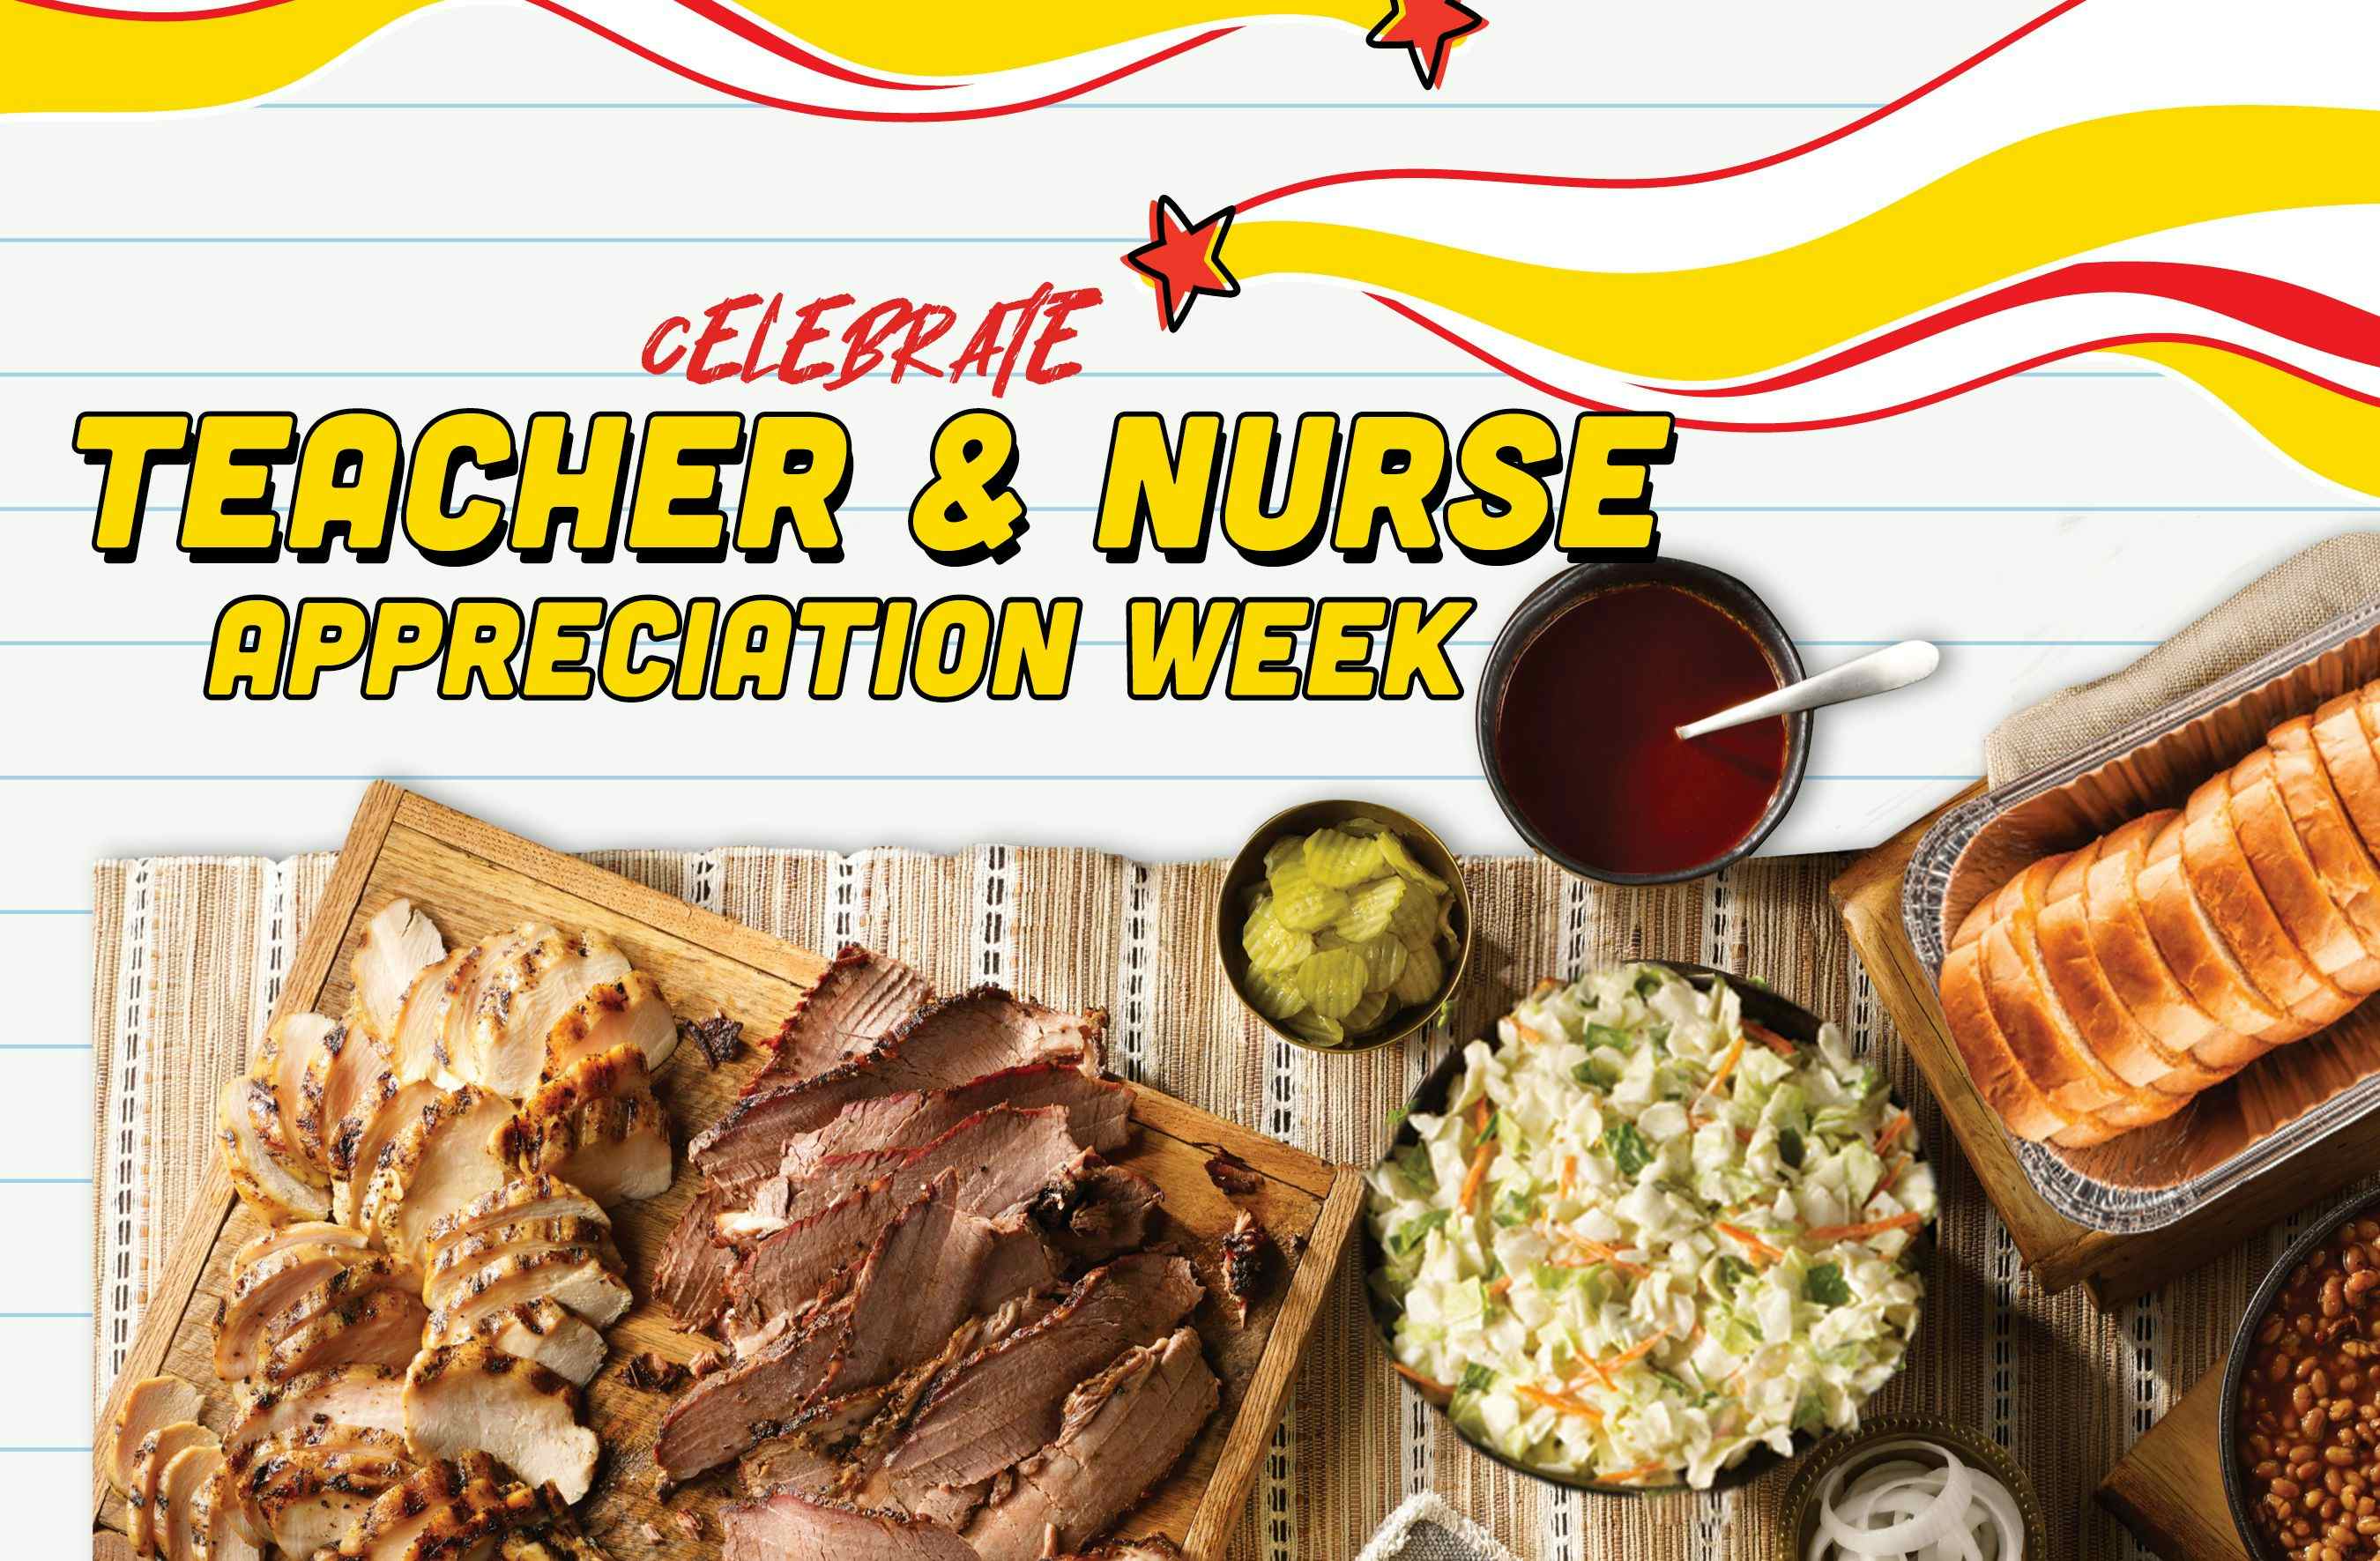 Celebrate Nurse and Teacher Appreciation Week with Dickey’s Barbecue Pit